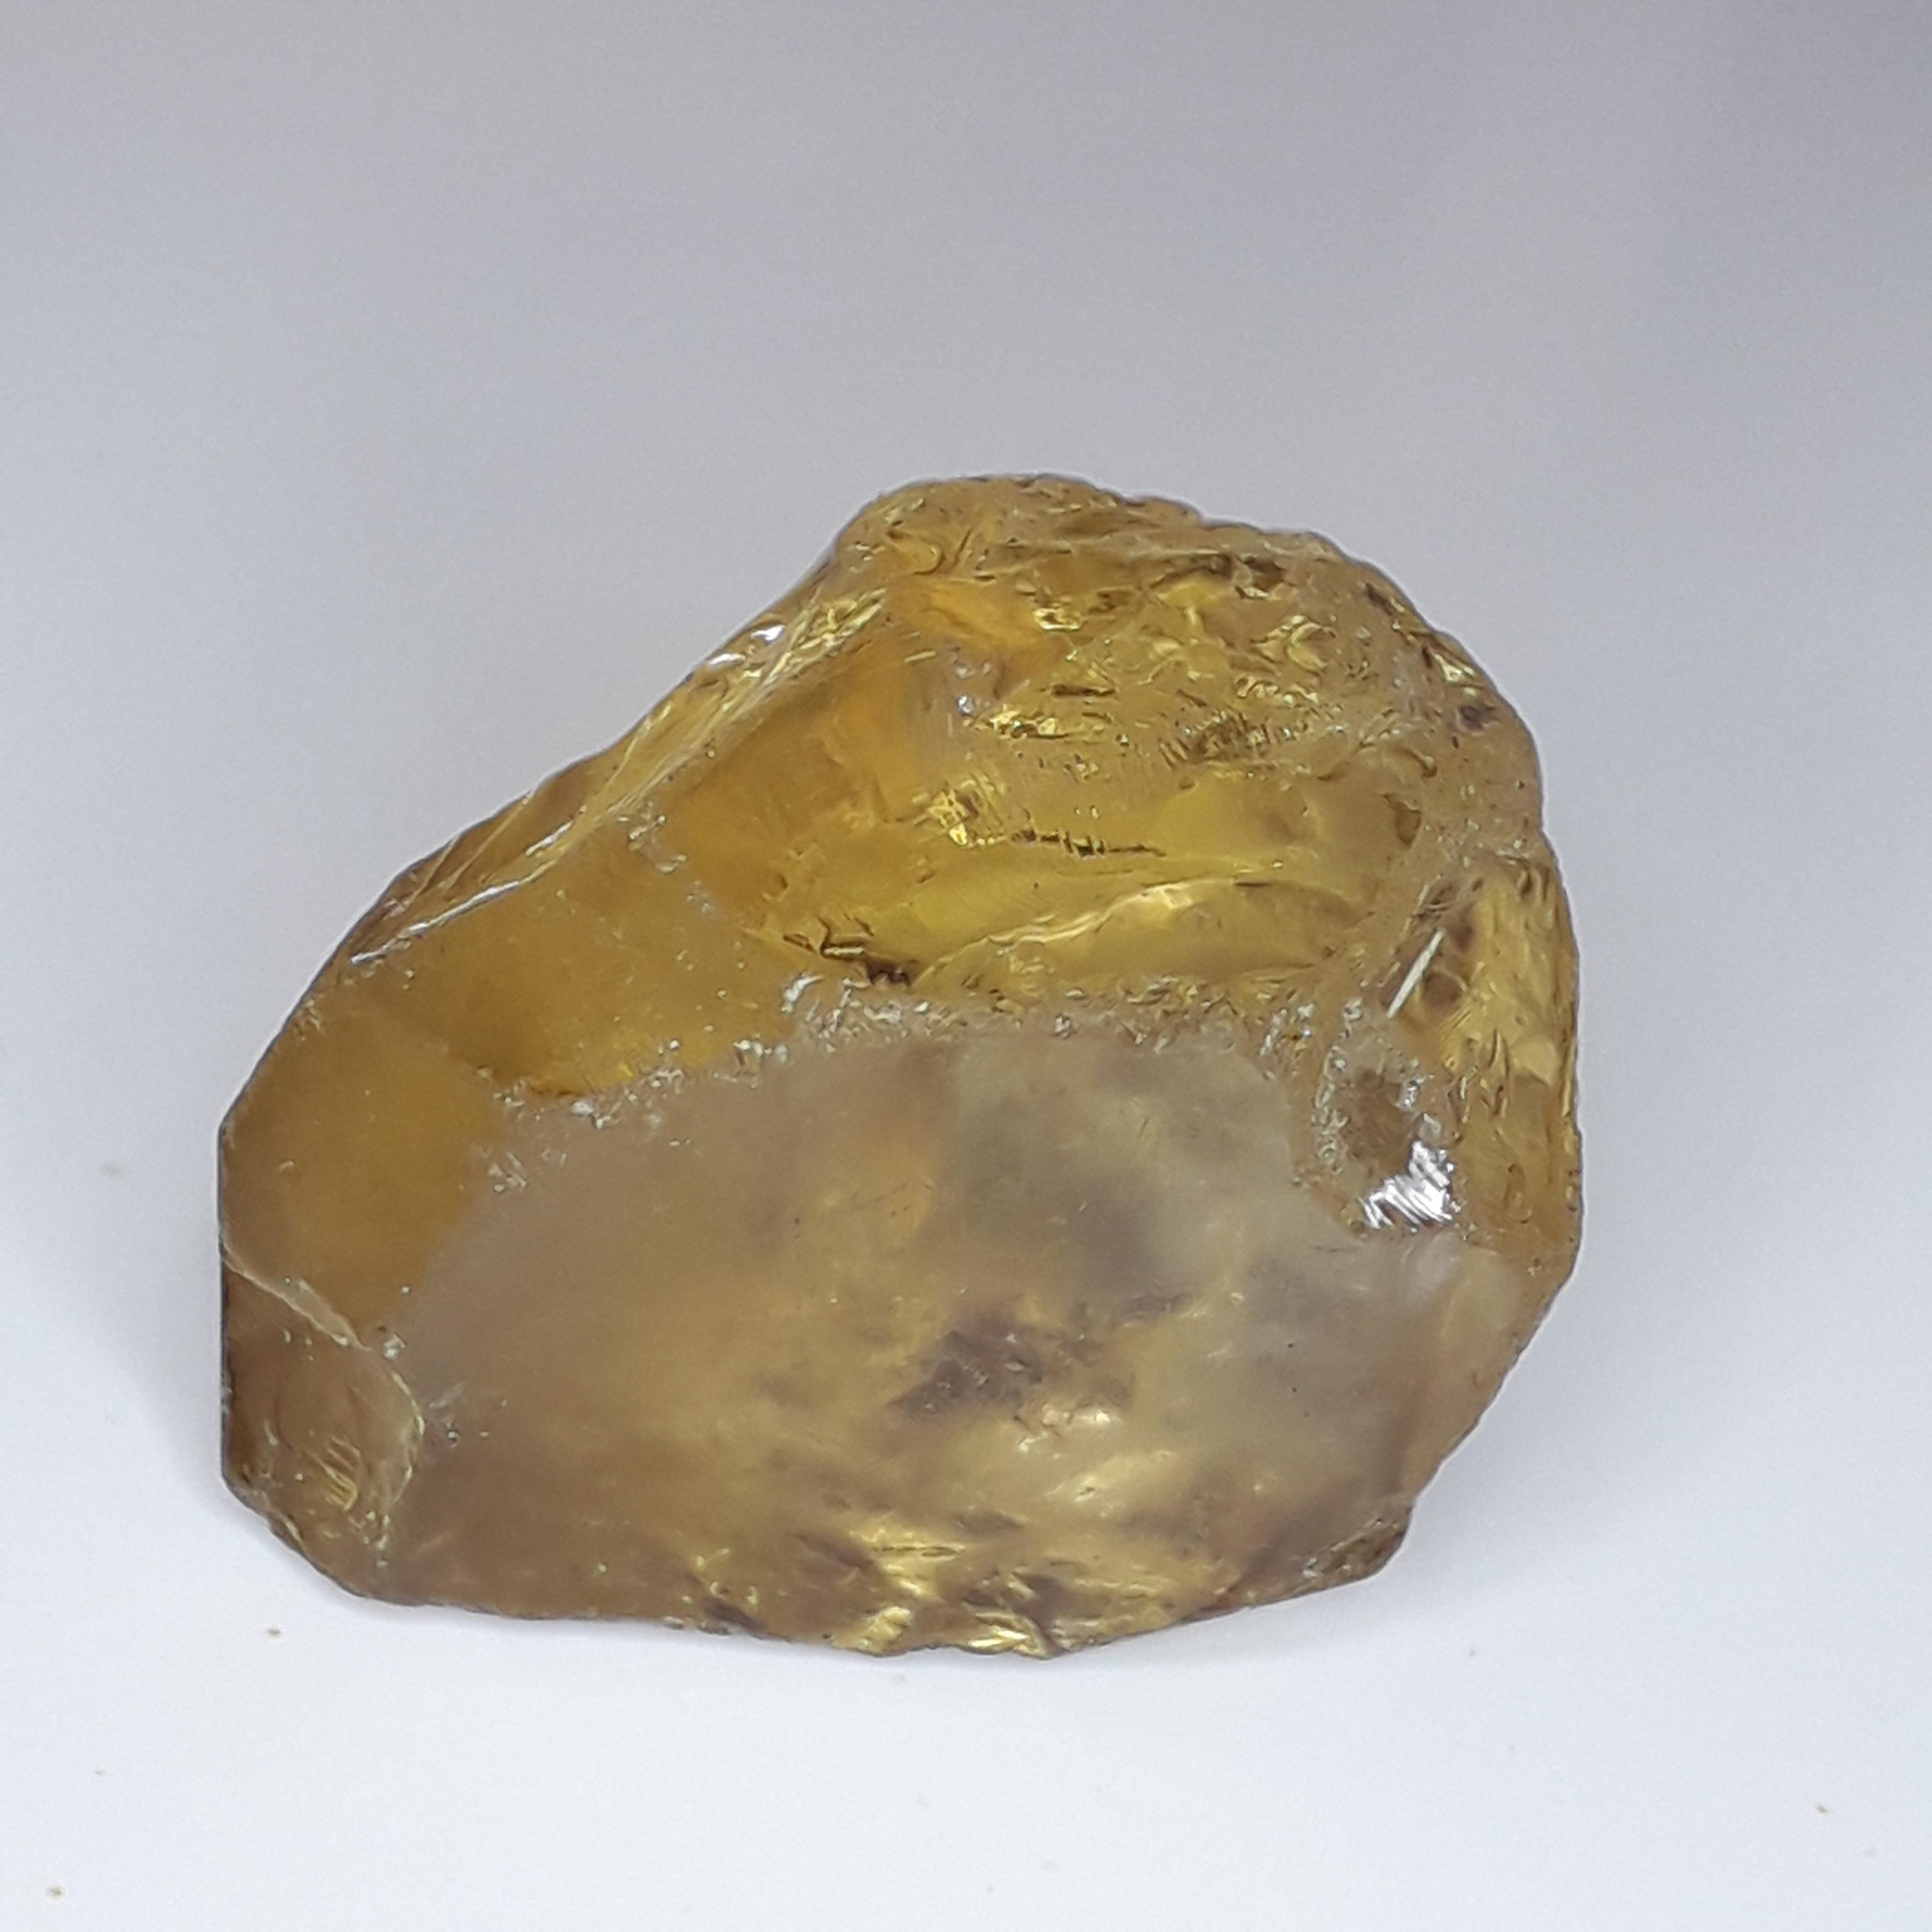 Plus a FREE Faceted Gemstone 2000 Carat Lots of Citrine Points Rough 